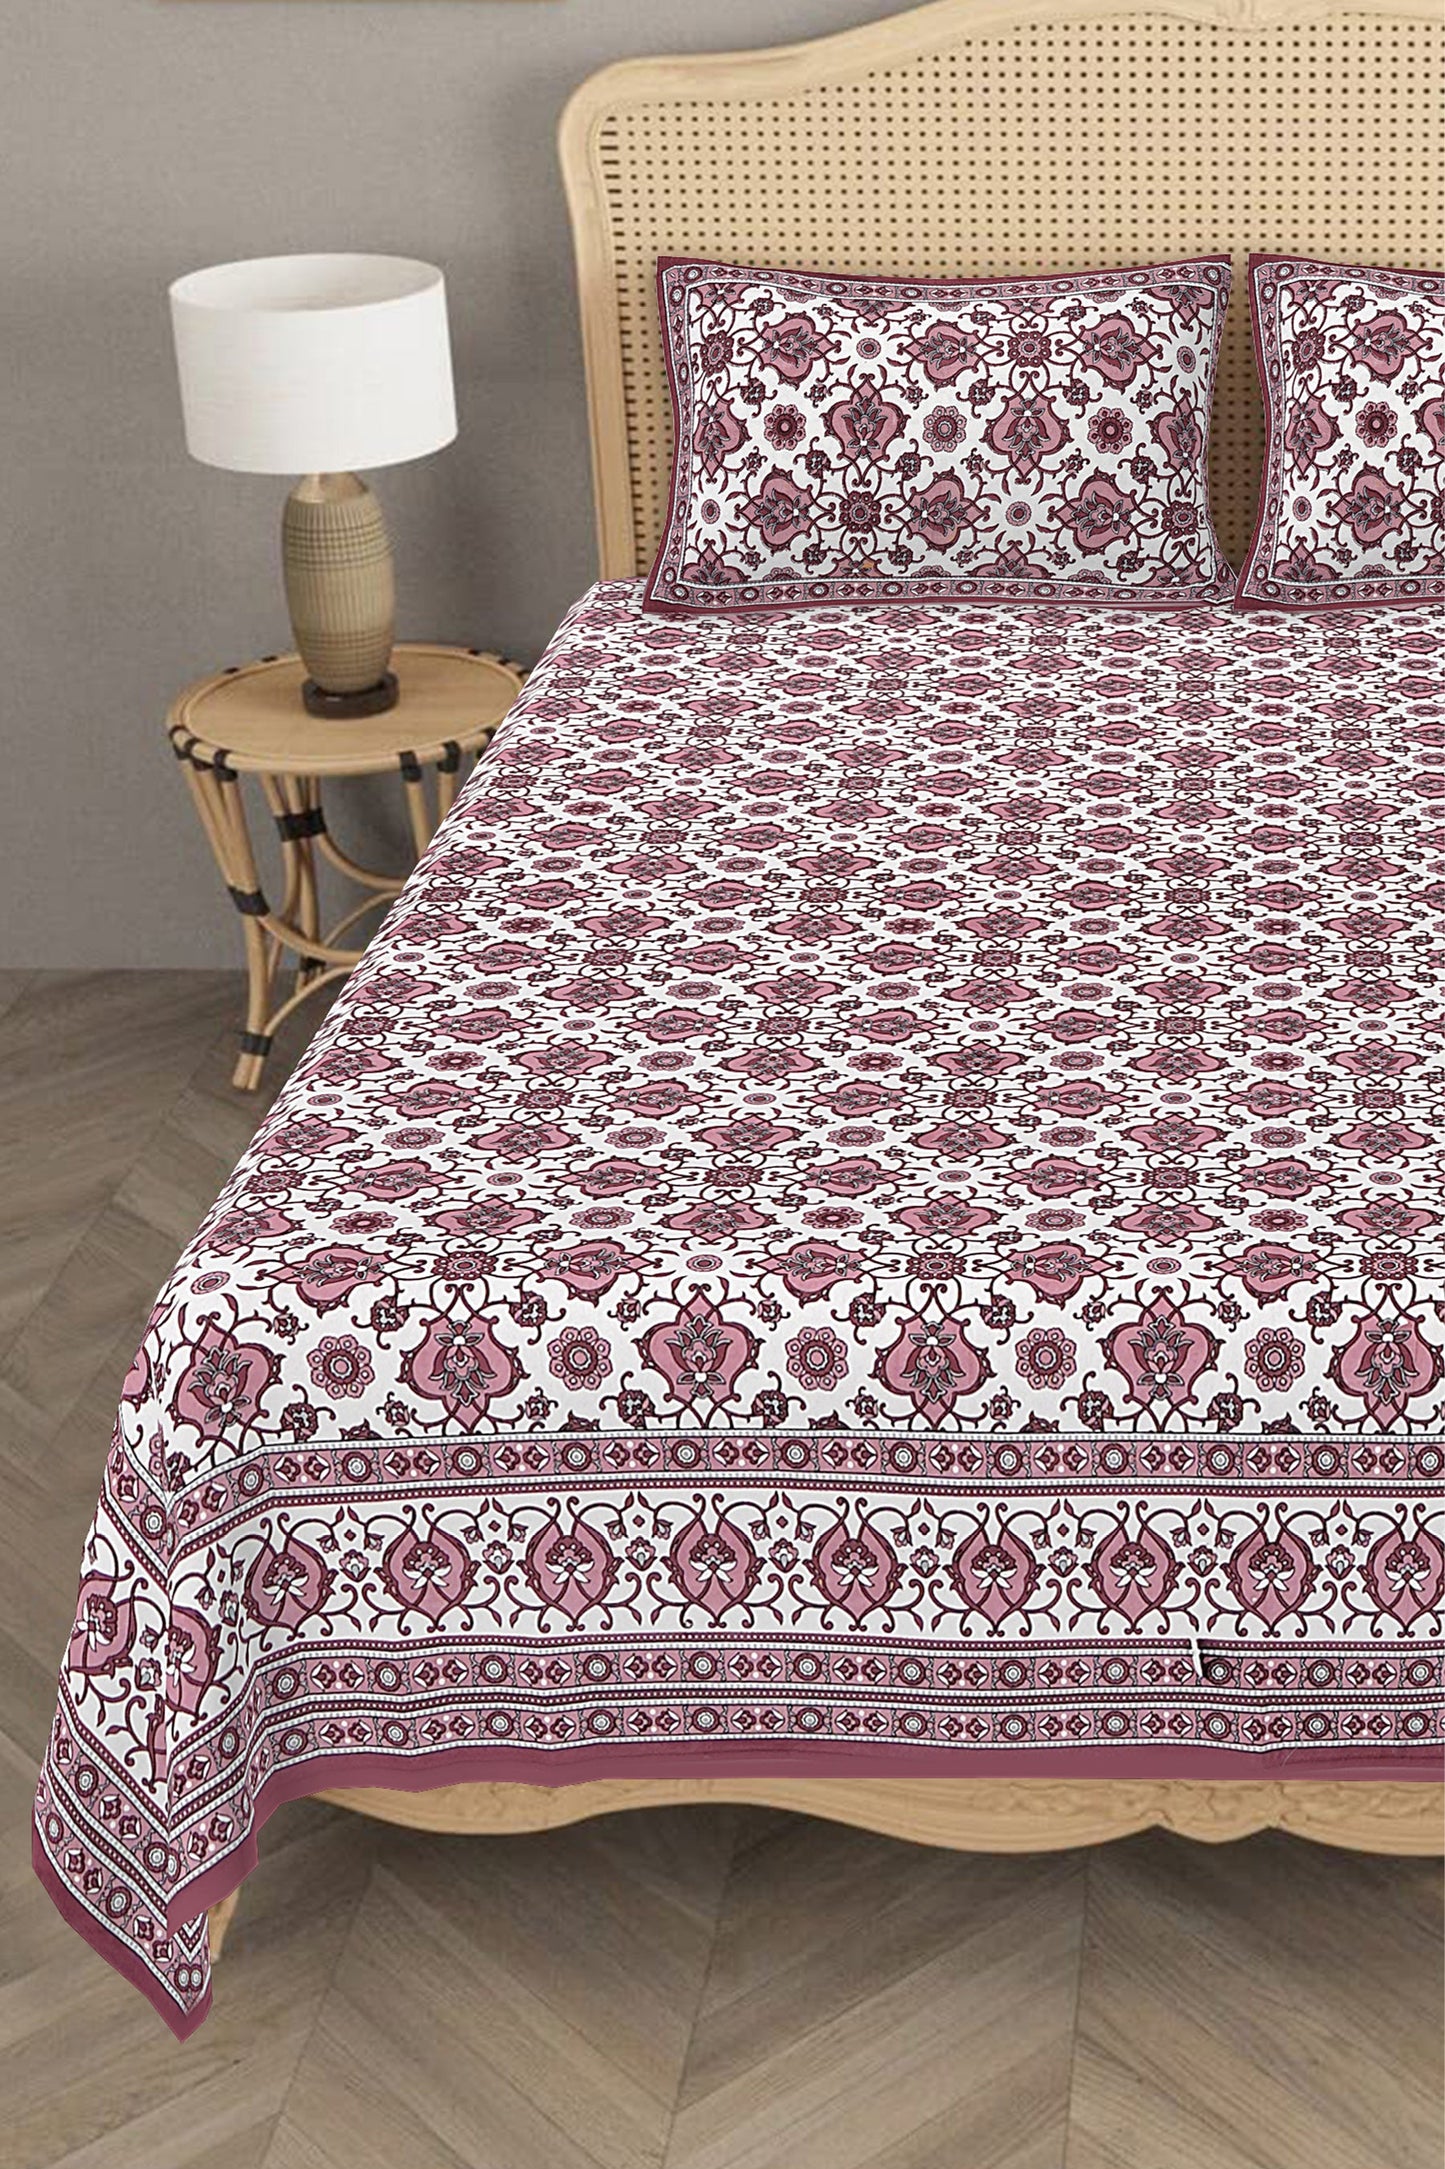 Beautifully Hand Crafted Moroccan Collection of Premium Sheets and Linens - Marrakesh Collection - Maroon Marikesh Double Bed Sheet with 2 Pillow Covers